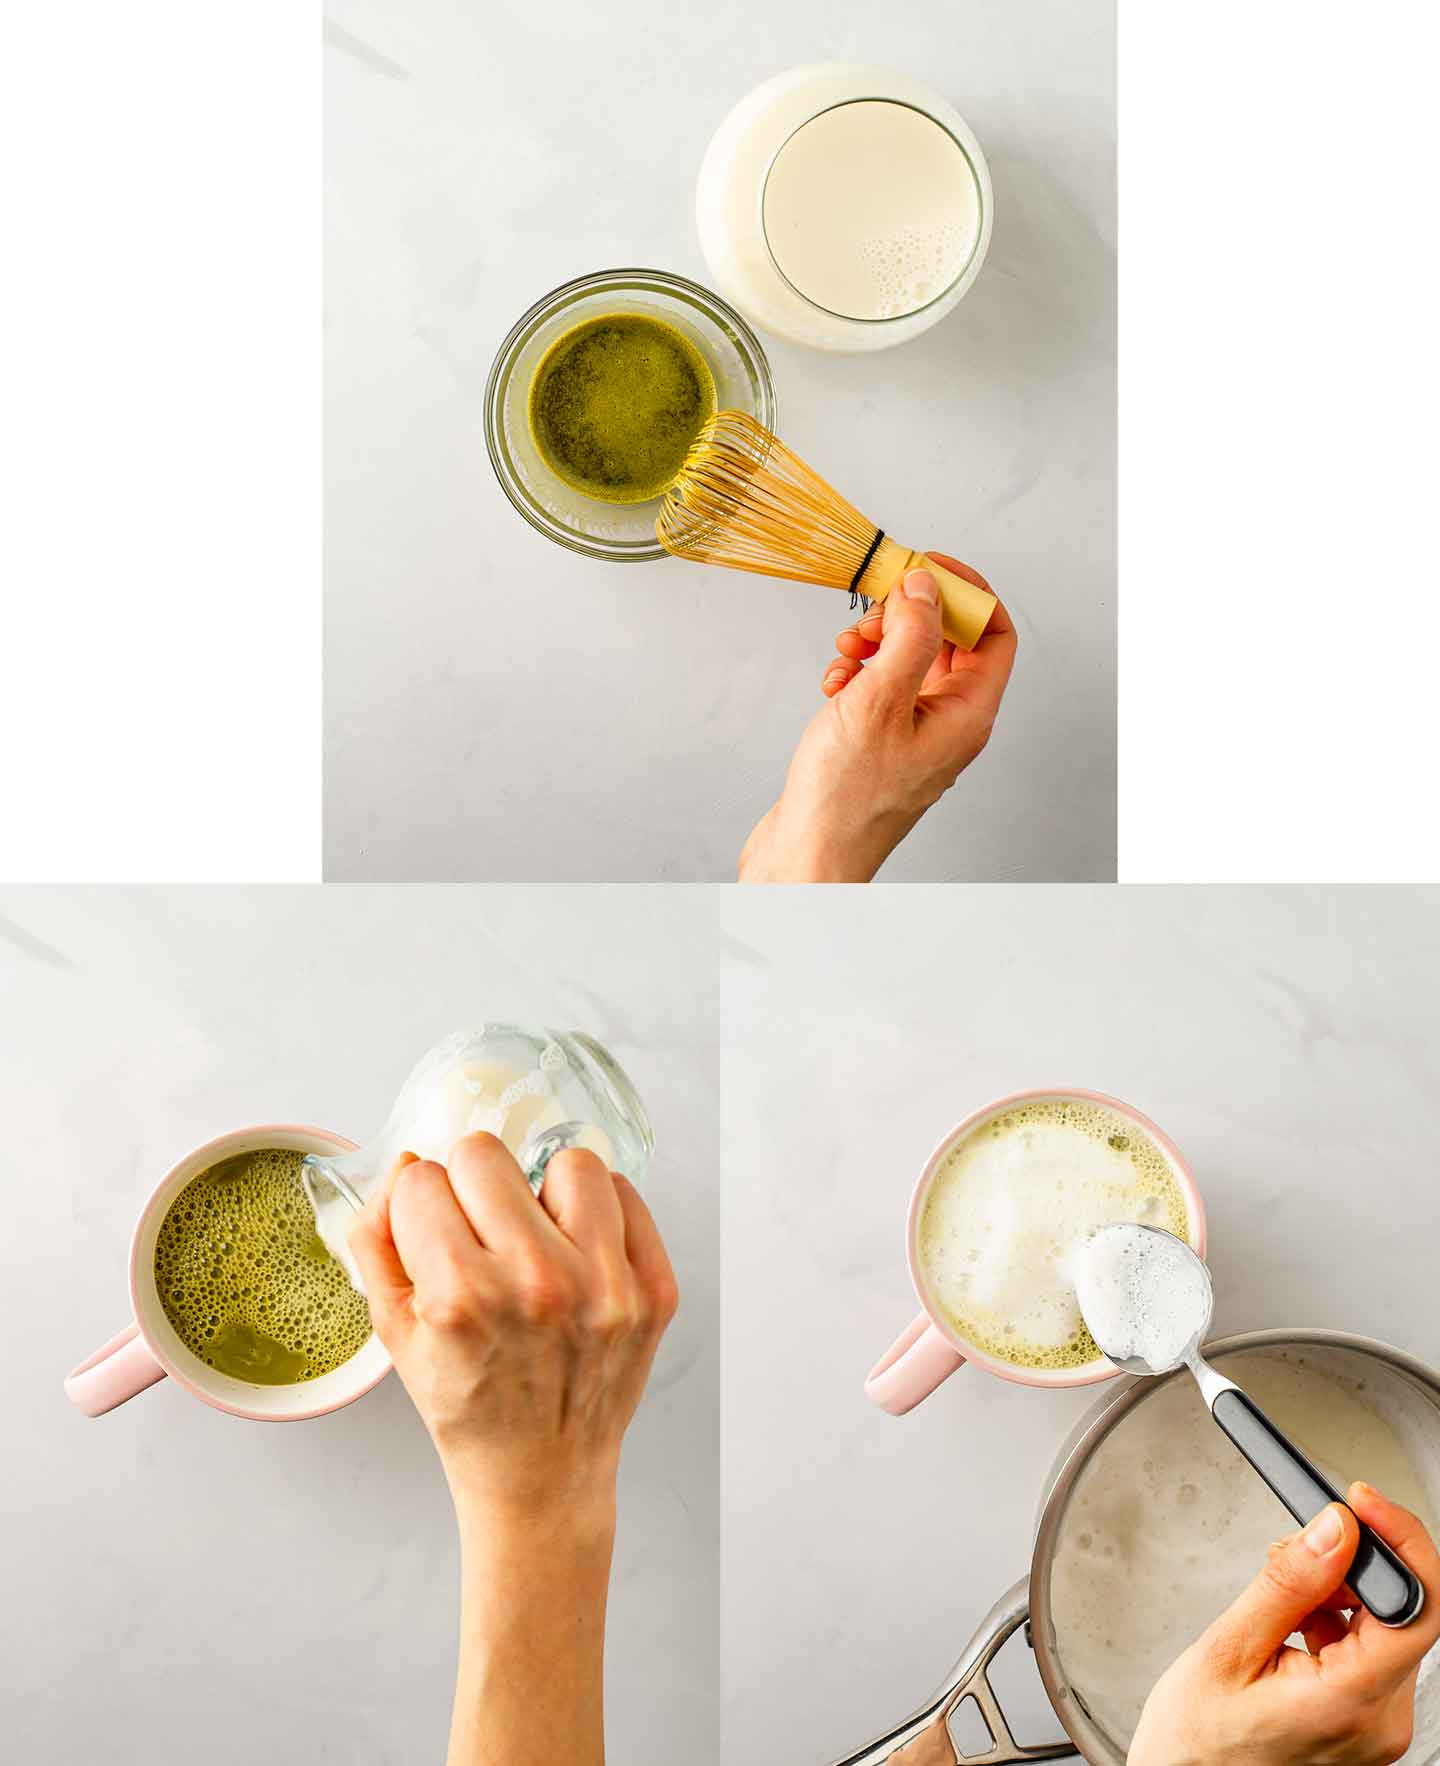 https://tastythriftytimely.com/wp-content/uploads/2021/06/Whisk-A-Quick-At-Home-Matcha-Latte-PROCESS.jpg